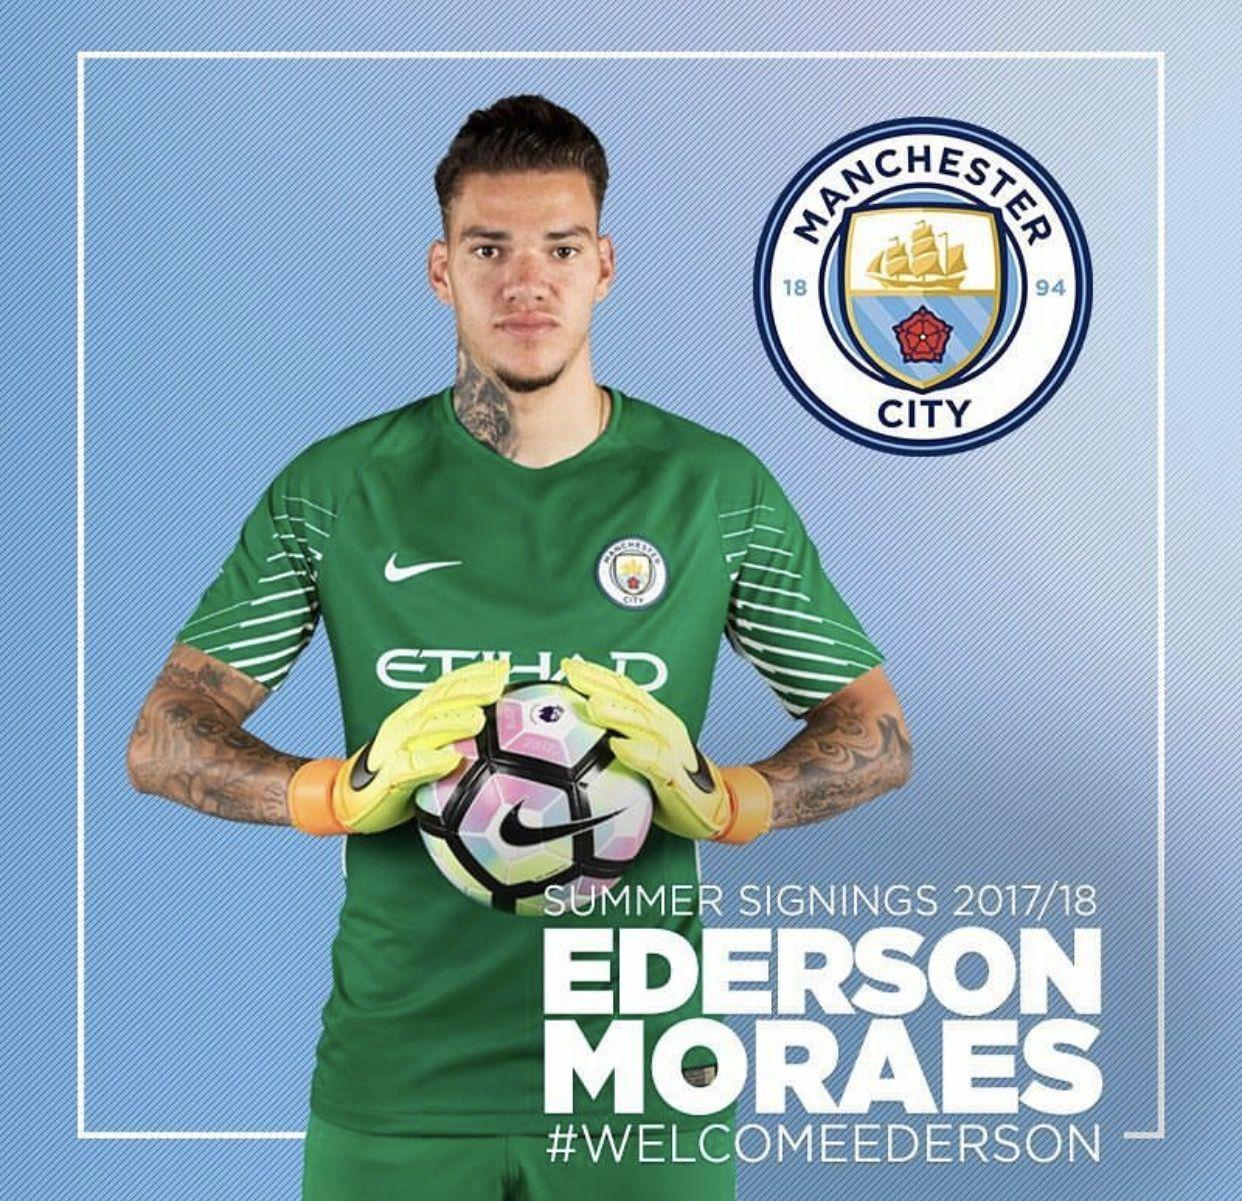 Welcome to Manchester Ederson Moraes #mcfc #manchester. Soccer